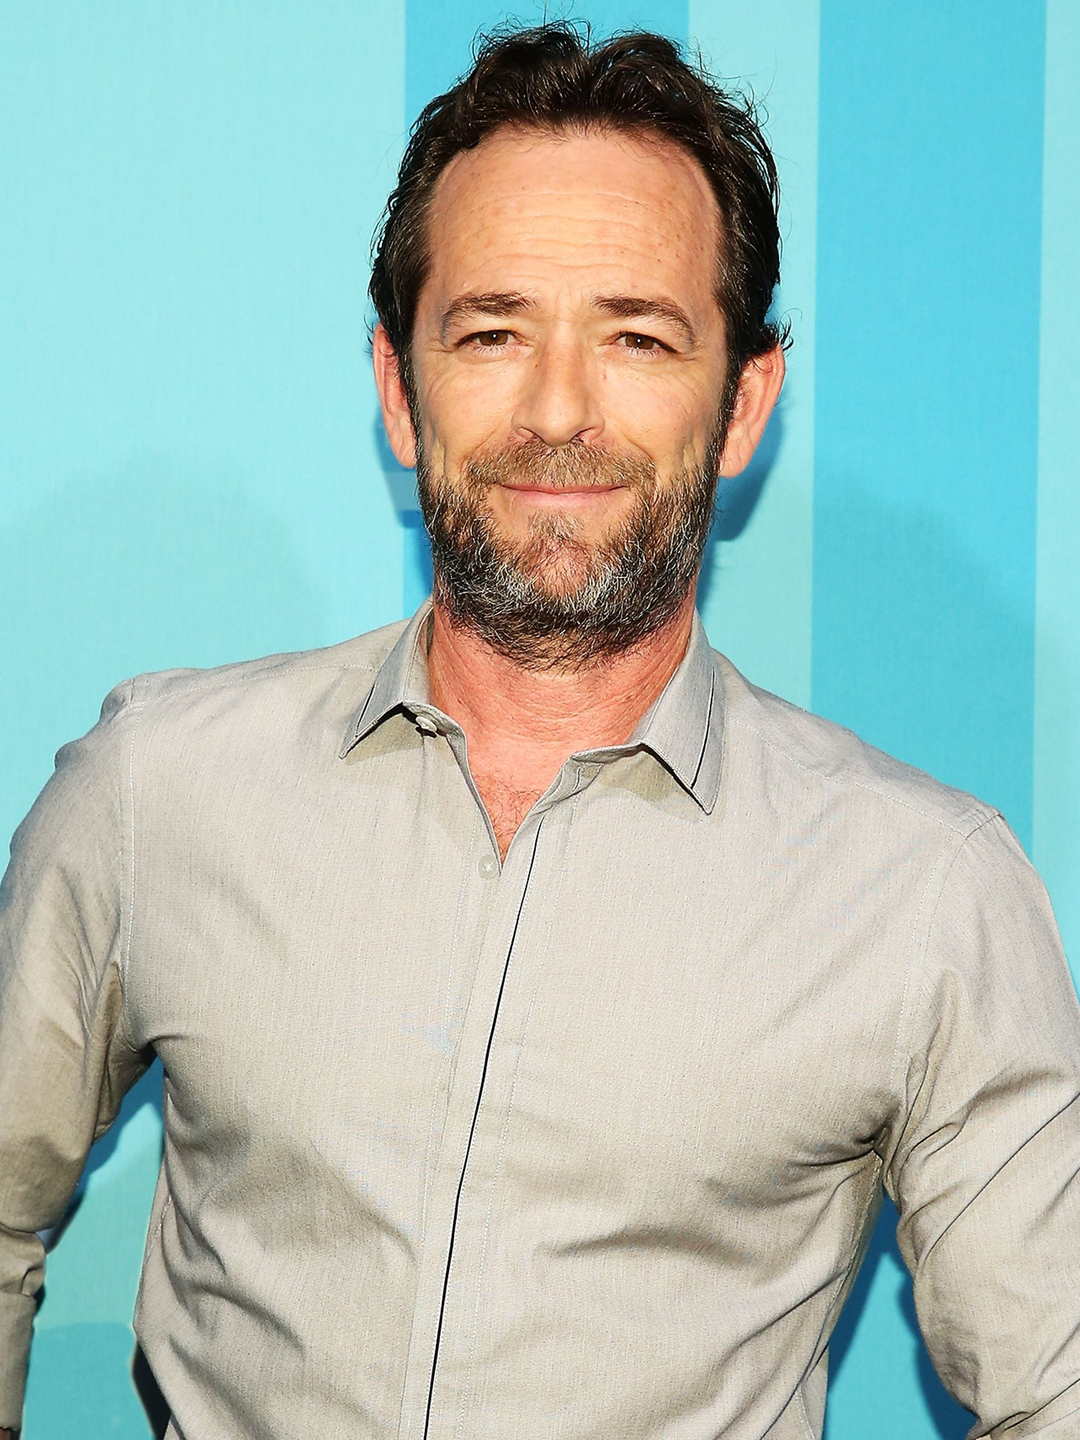 Luke Perry young pics